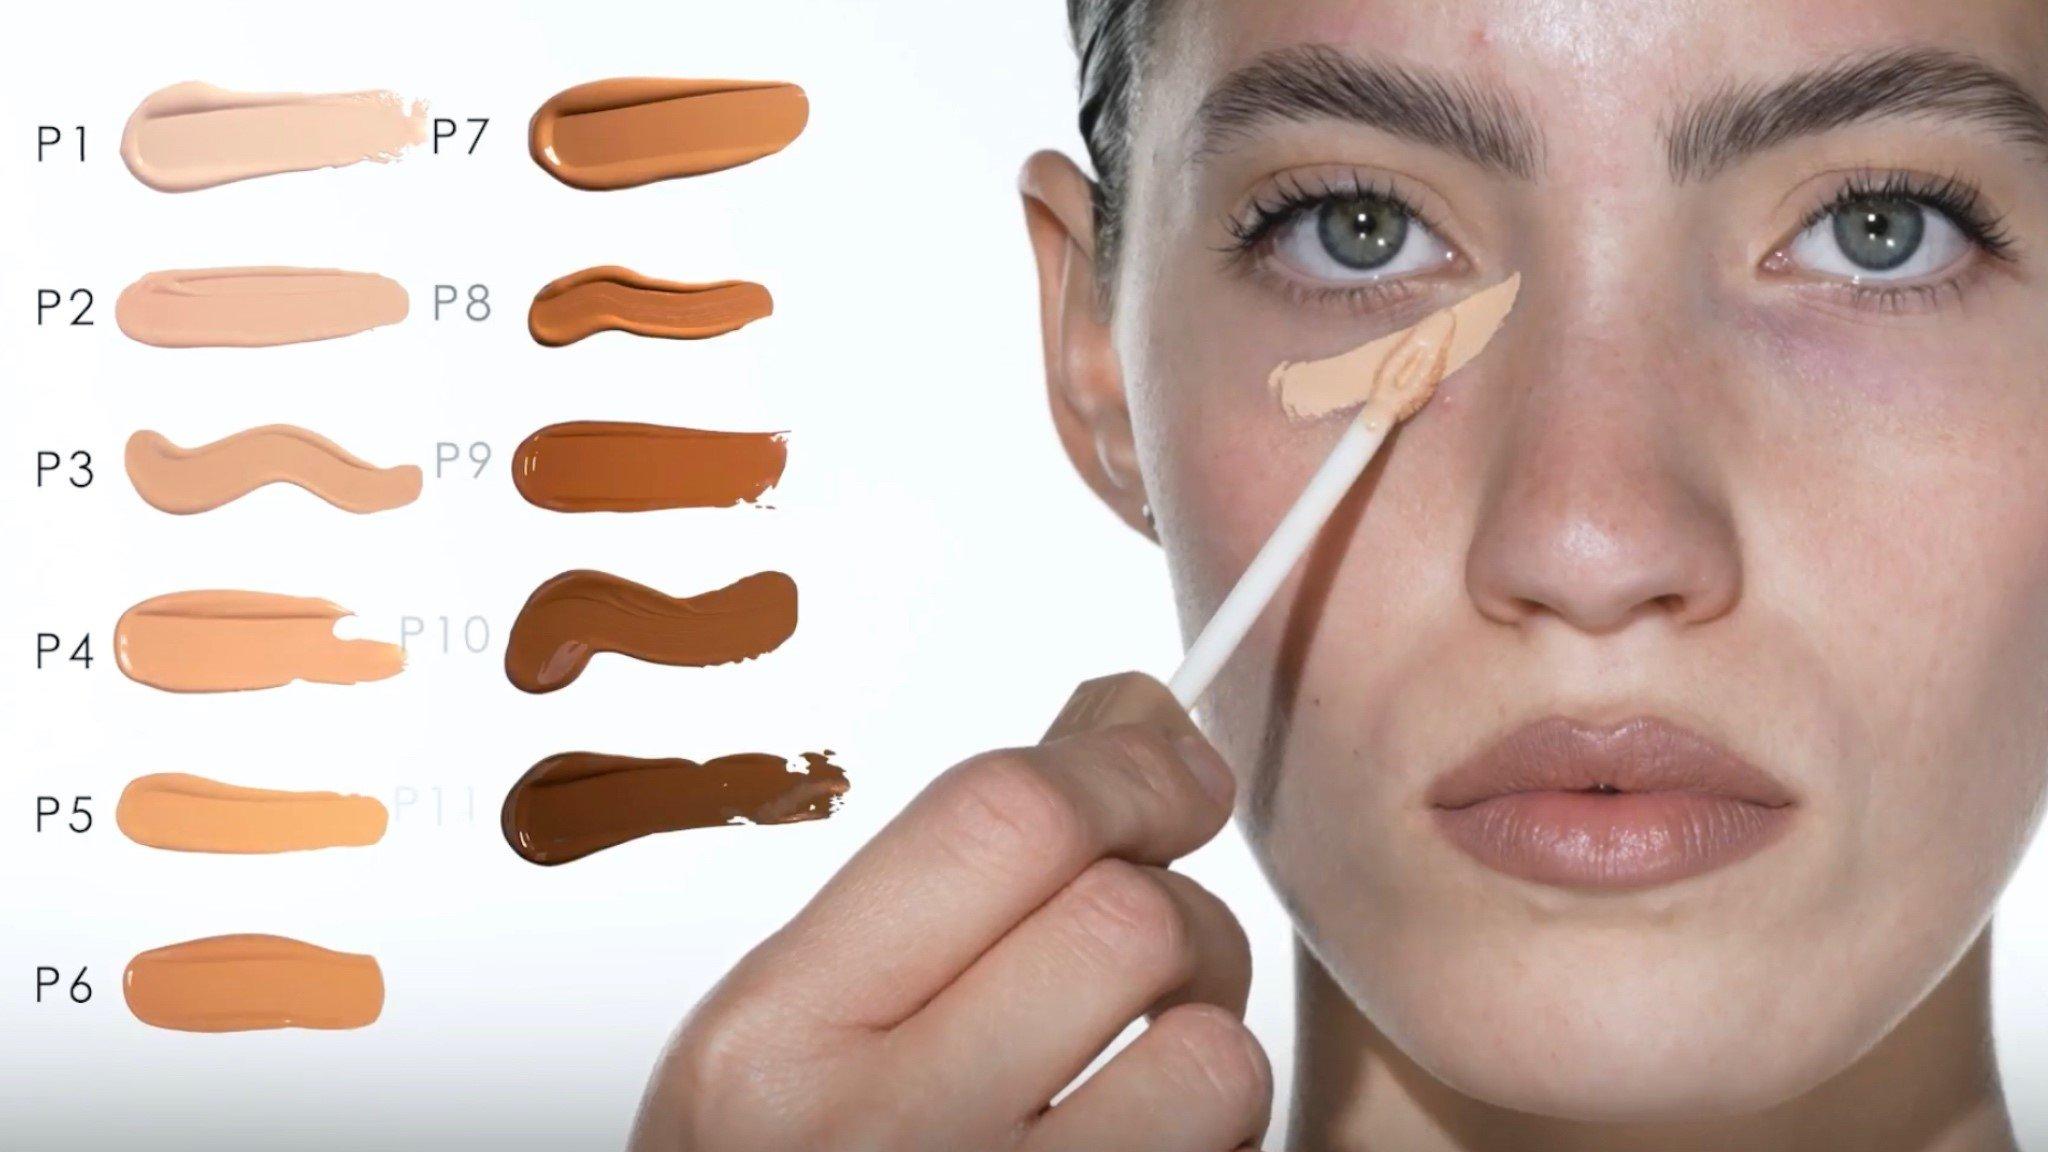 How to Use CHANEL Color Correcting Concealers for a Flawless Face